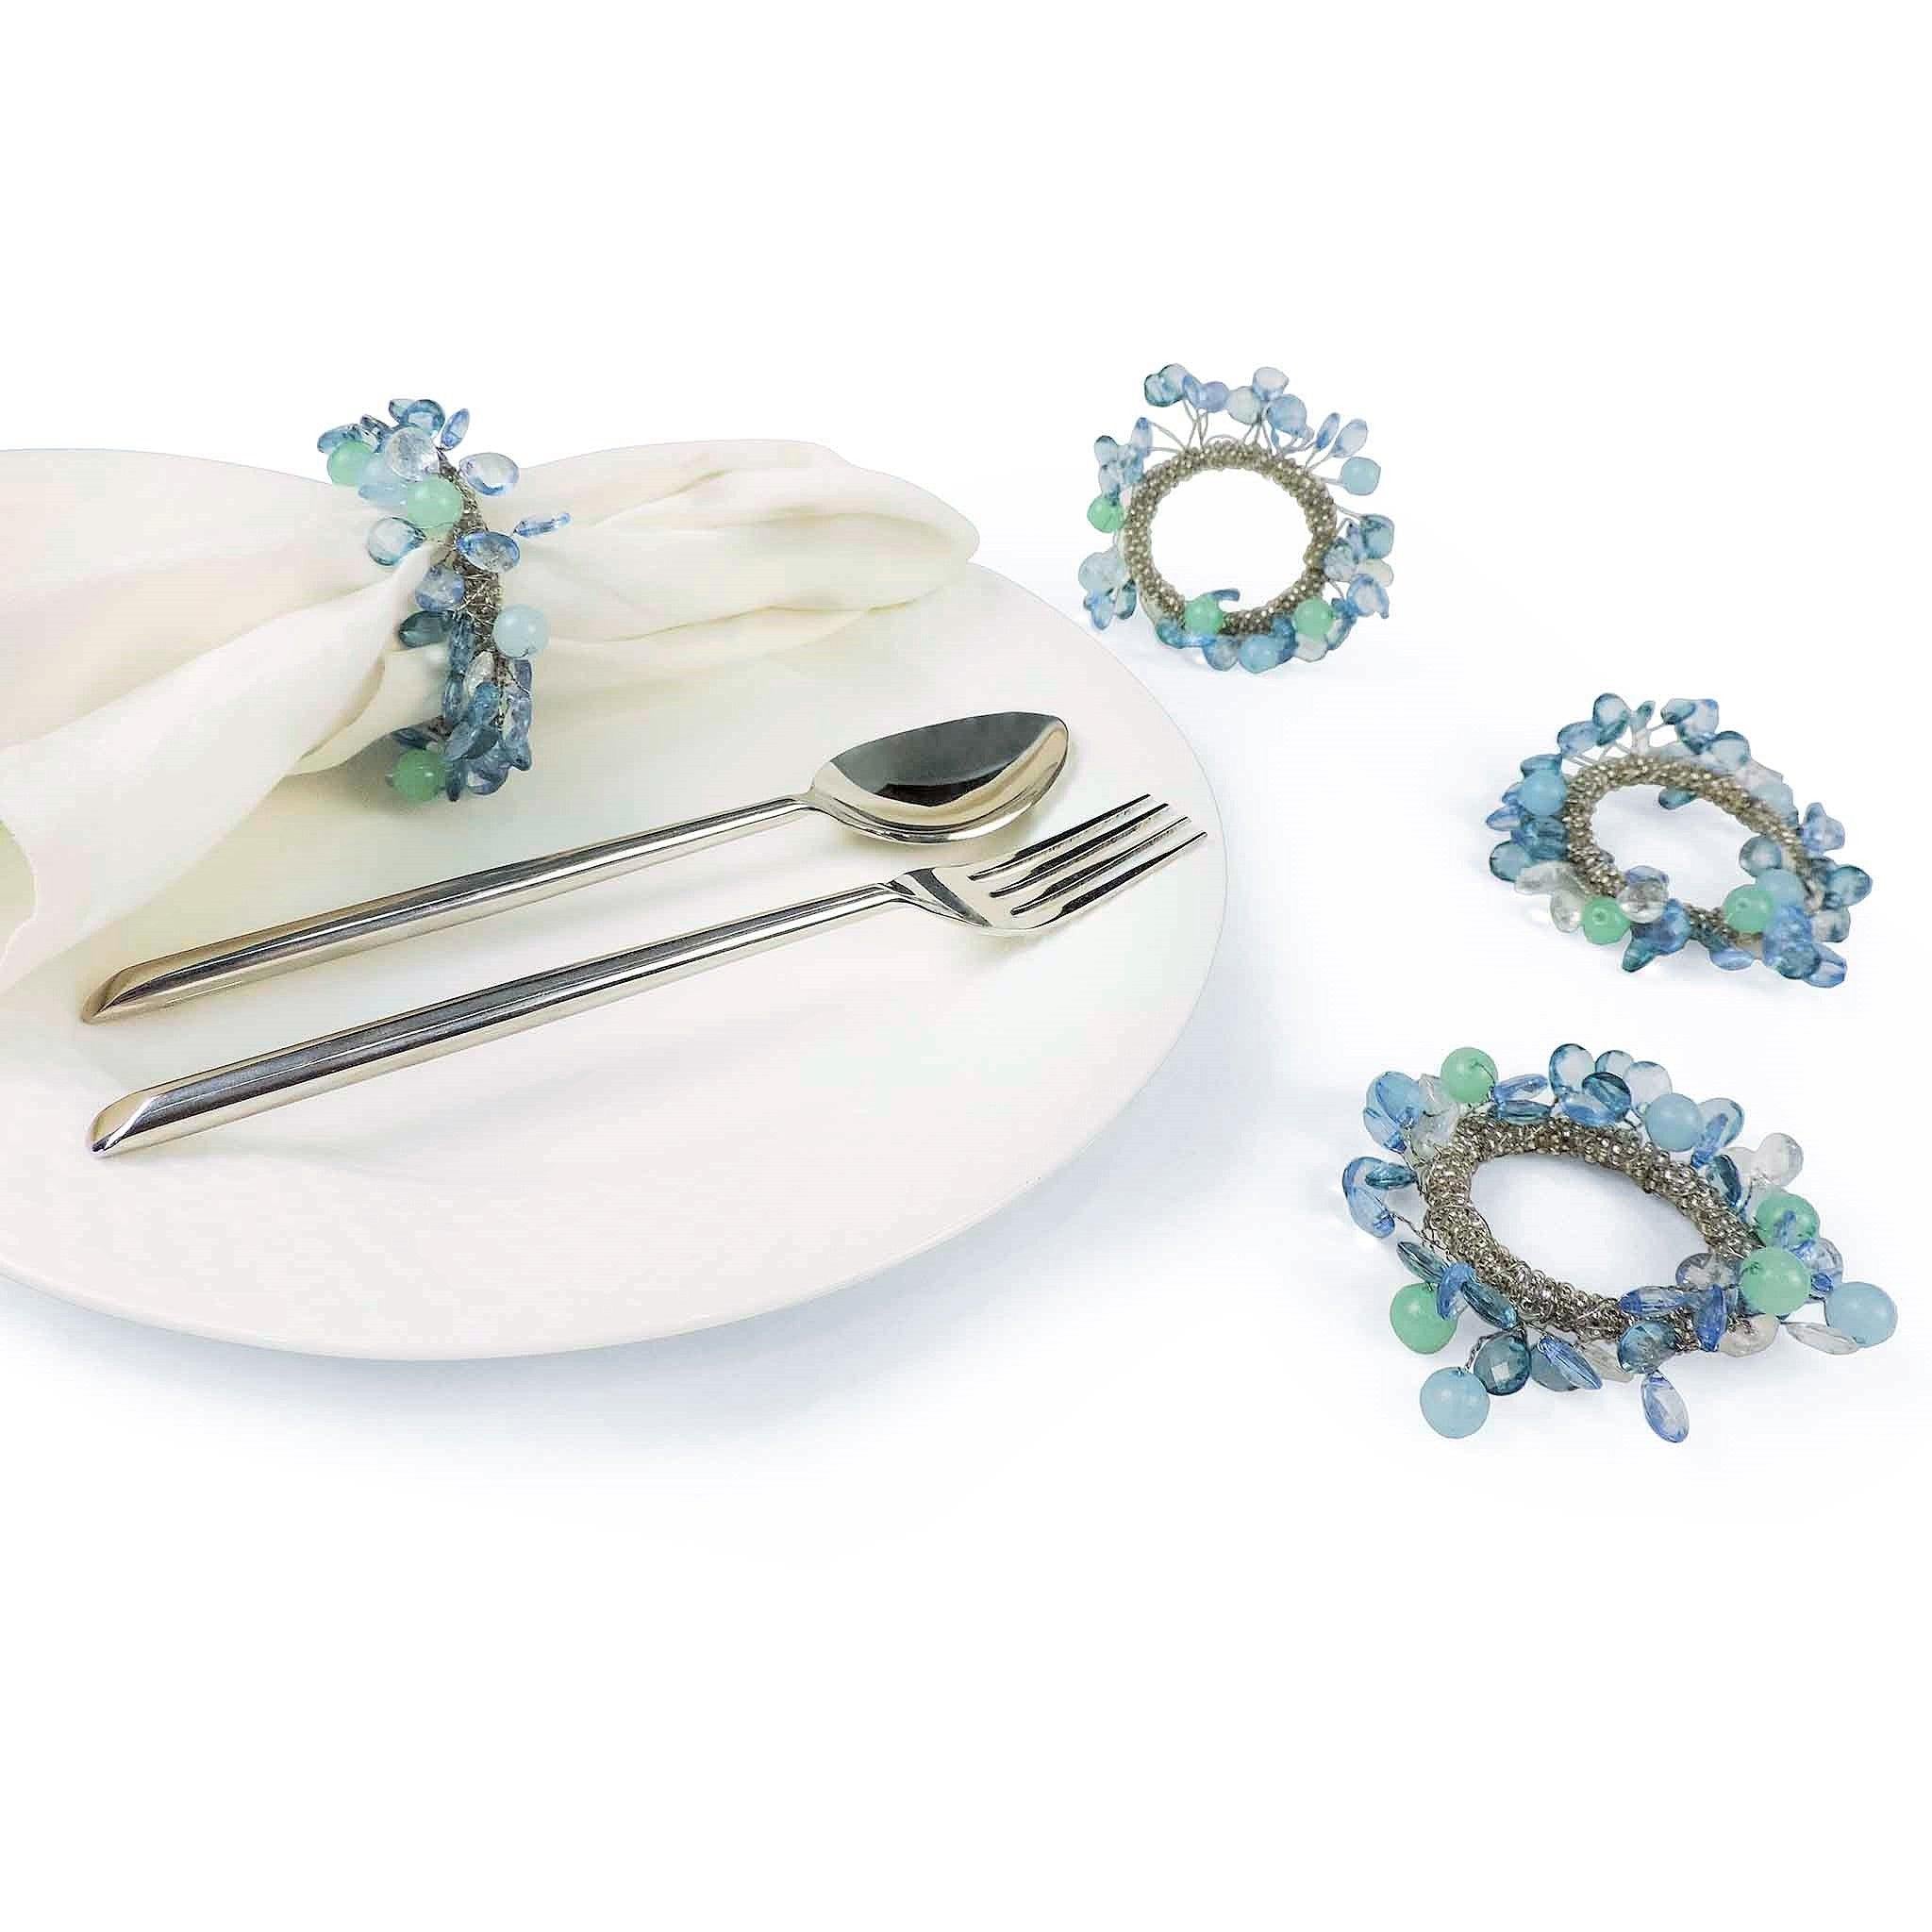 Blue-Chip Beaded Napkin Ring in Blue, Set of 4